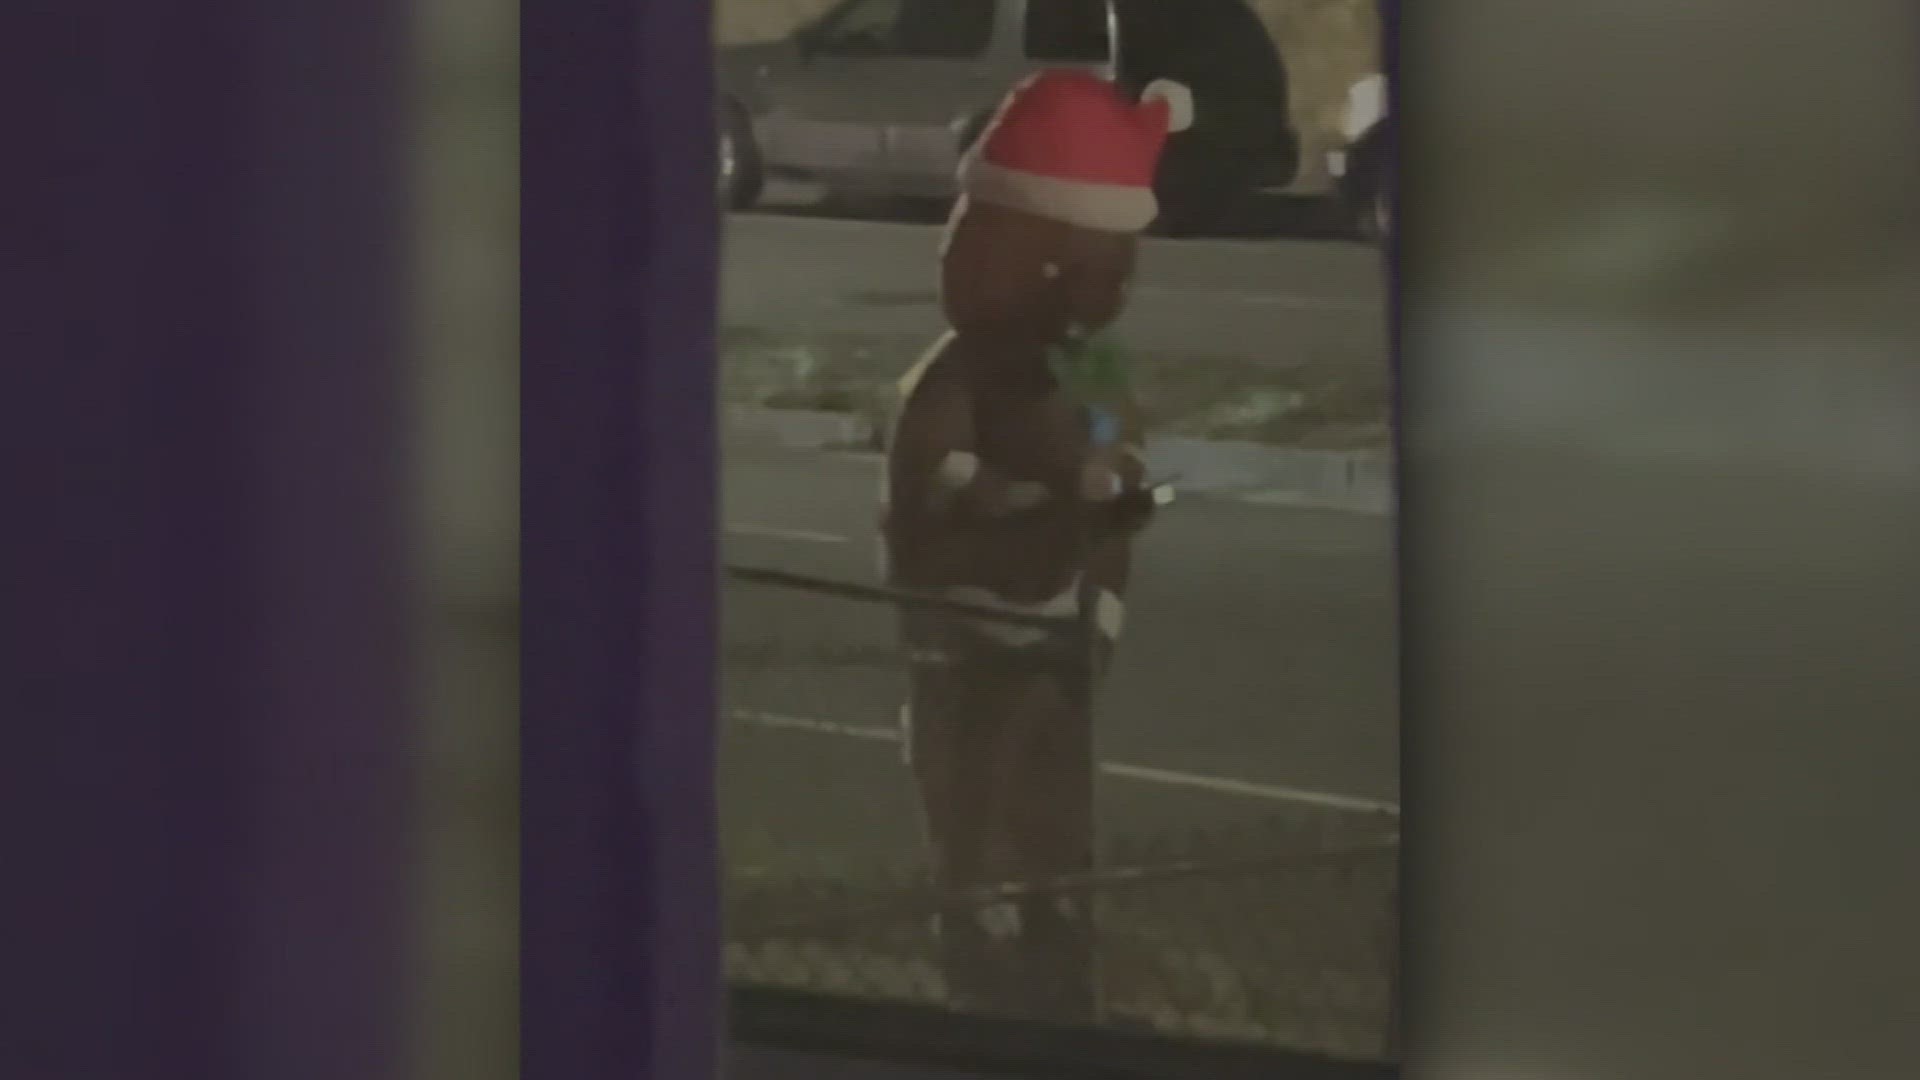 One man says the gingerbread man tried to open his front door. Another person told WUSA9 he was just standing outside her window.